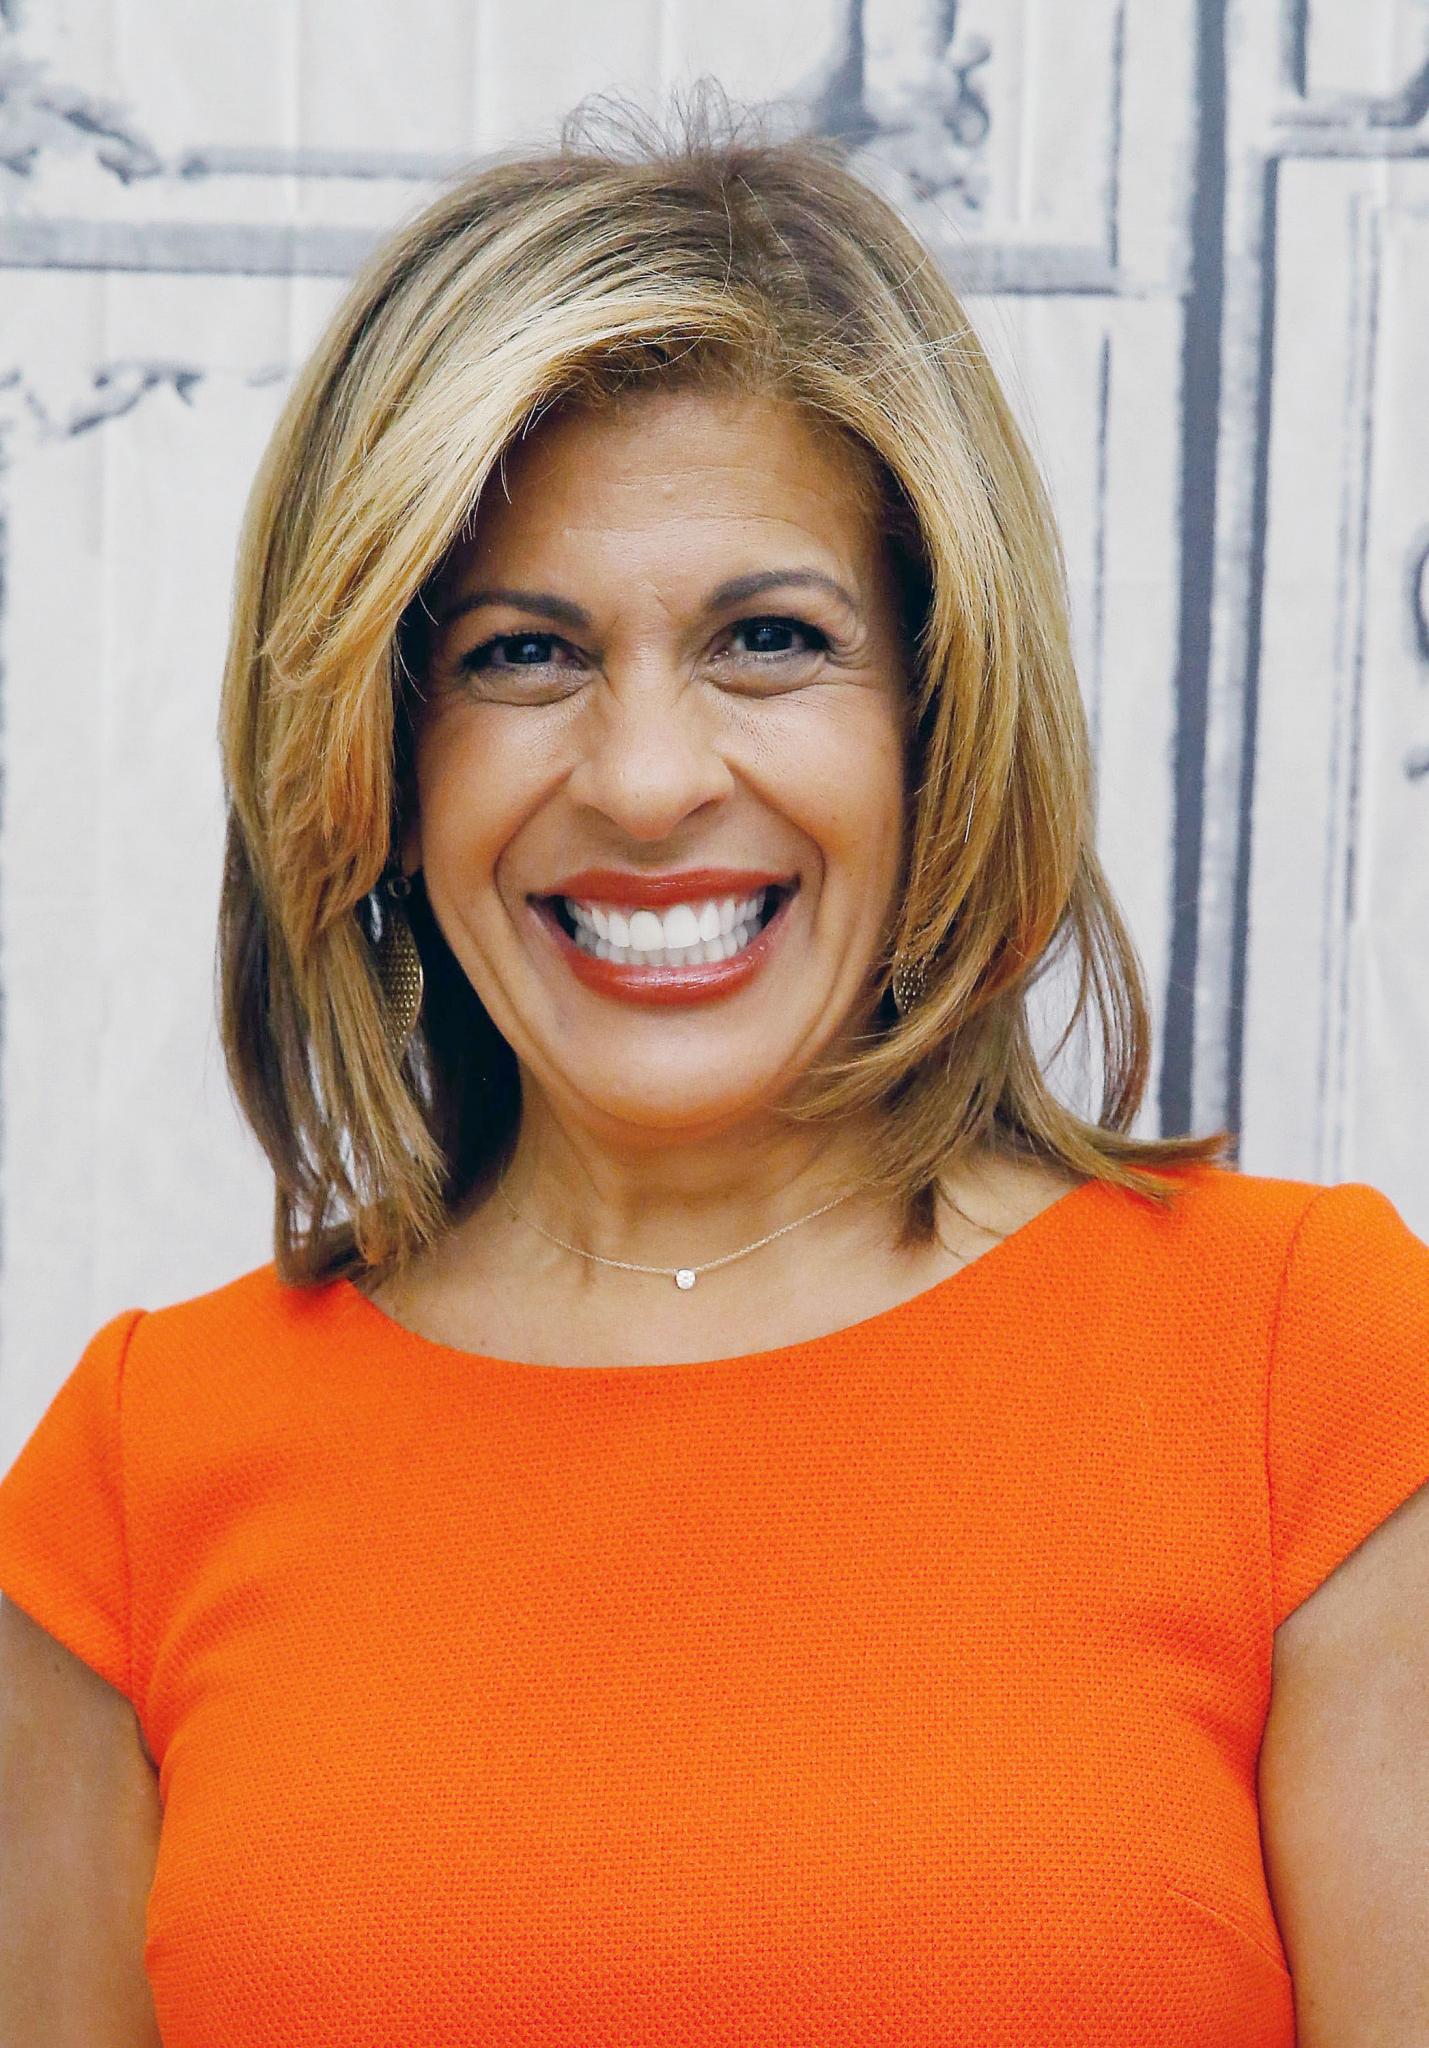 Hoda Kotb Opens Up About Emotional Adoption at 52 After Cancer Left Her Unable to Conceive
